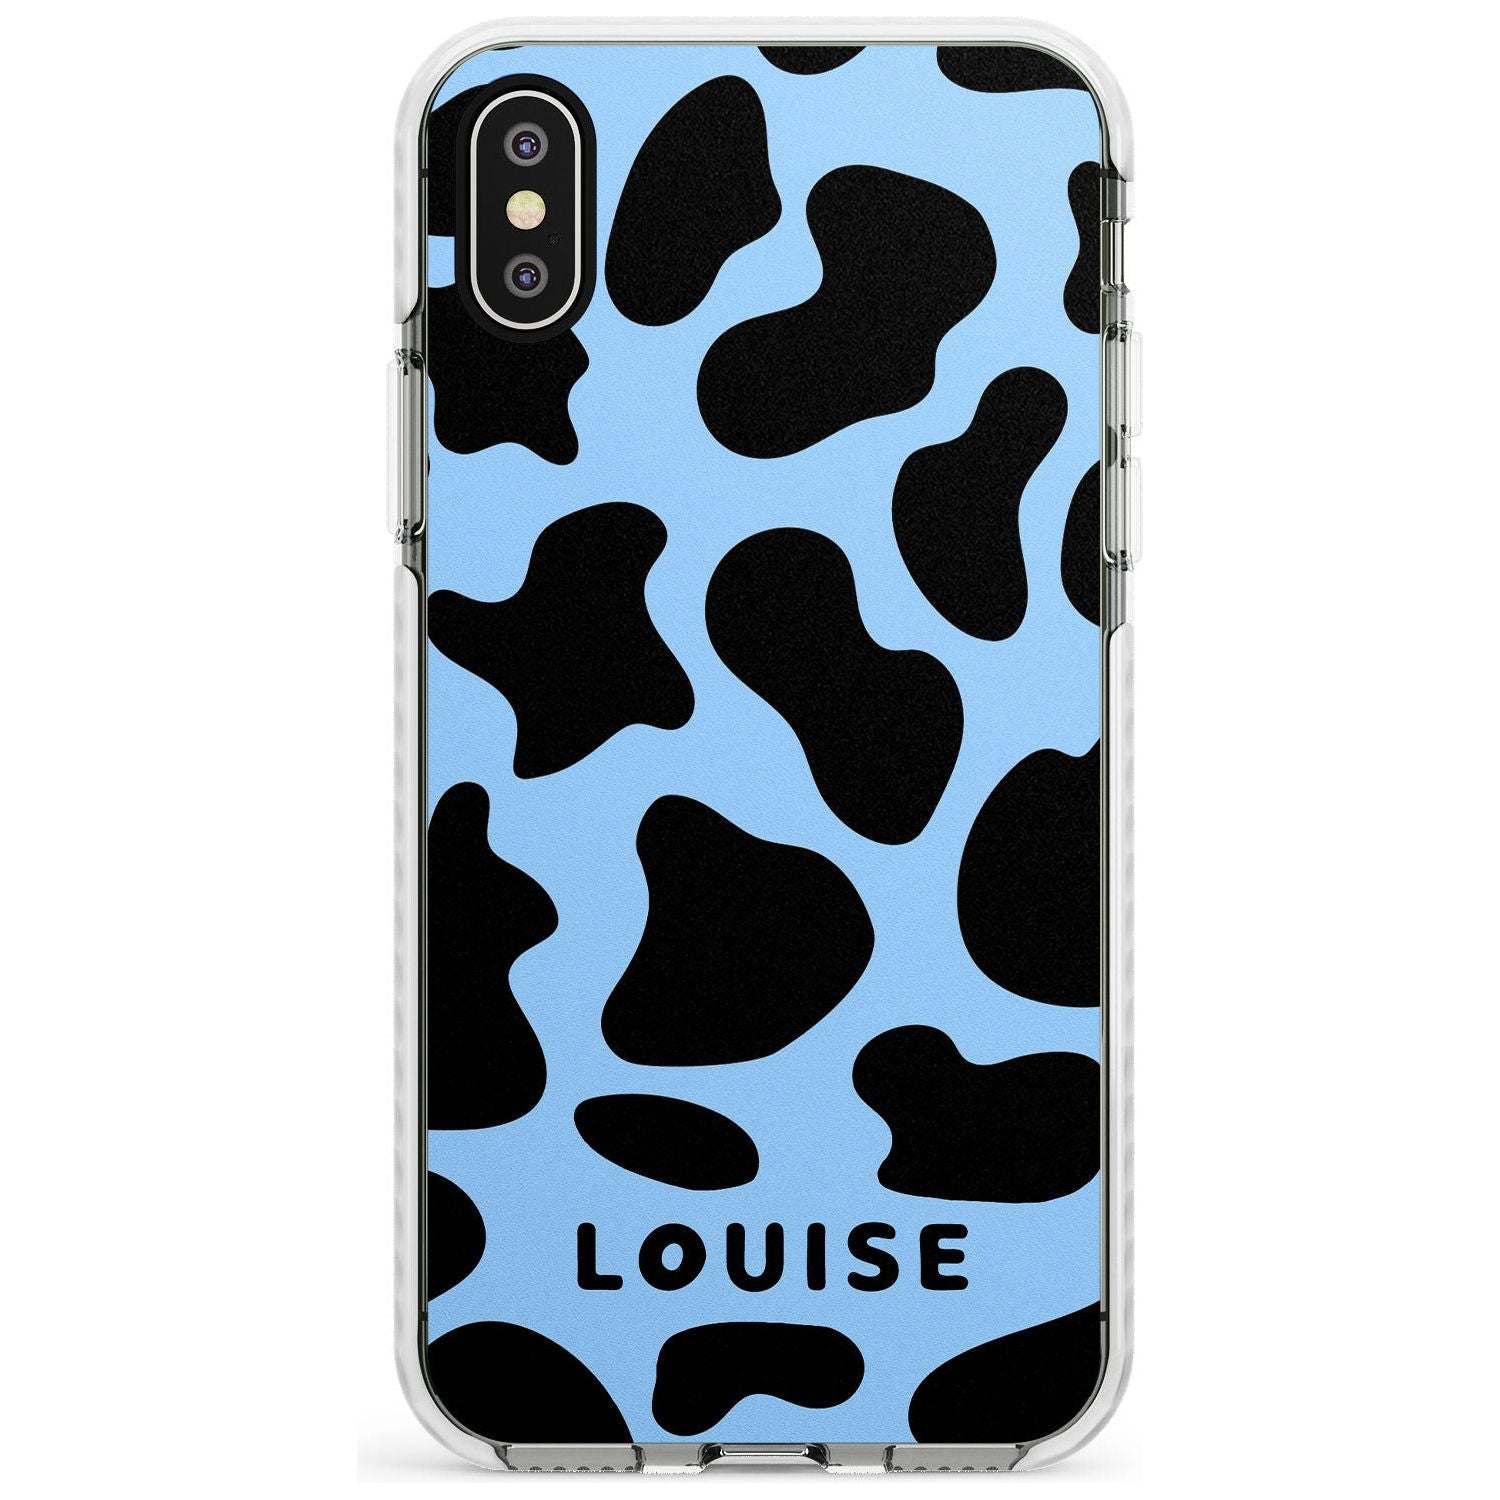 Personalised Blue and Black Cow Print Impact Phone Case for iPhone X XS Max XR